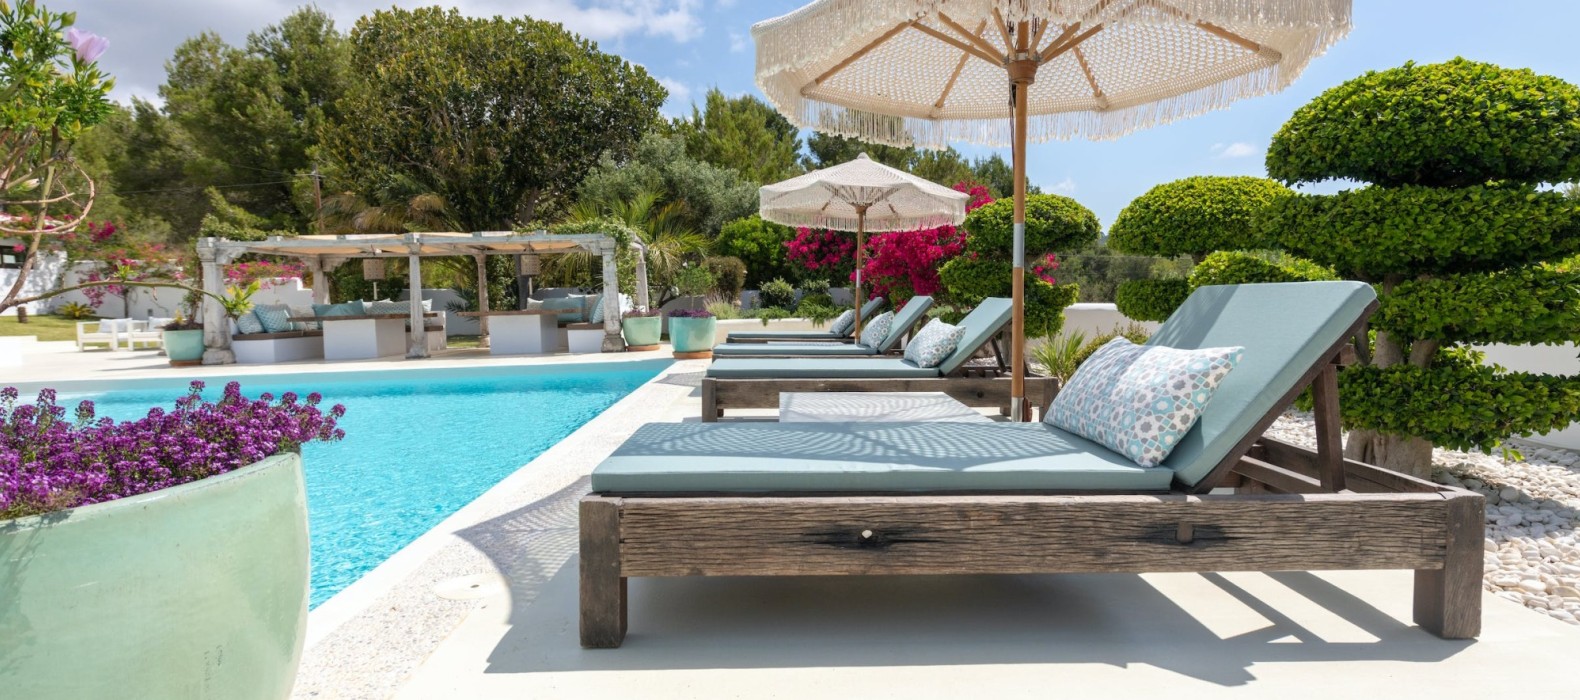 Sun loungers at the pool of Villa Glamour in Ibiza